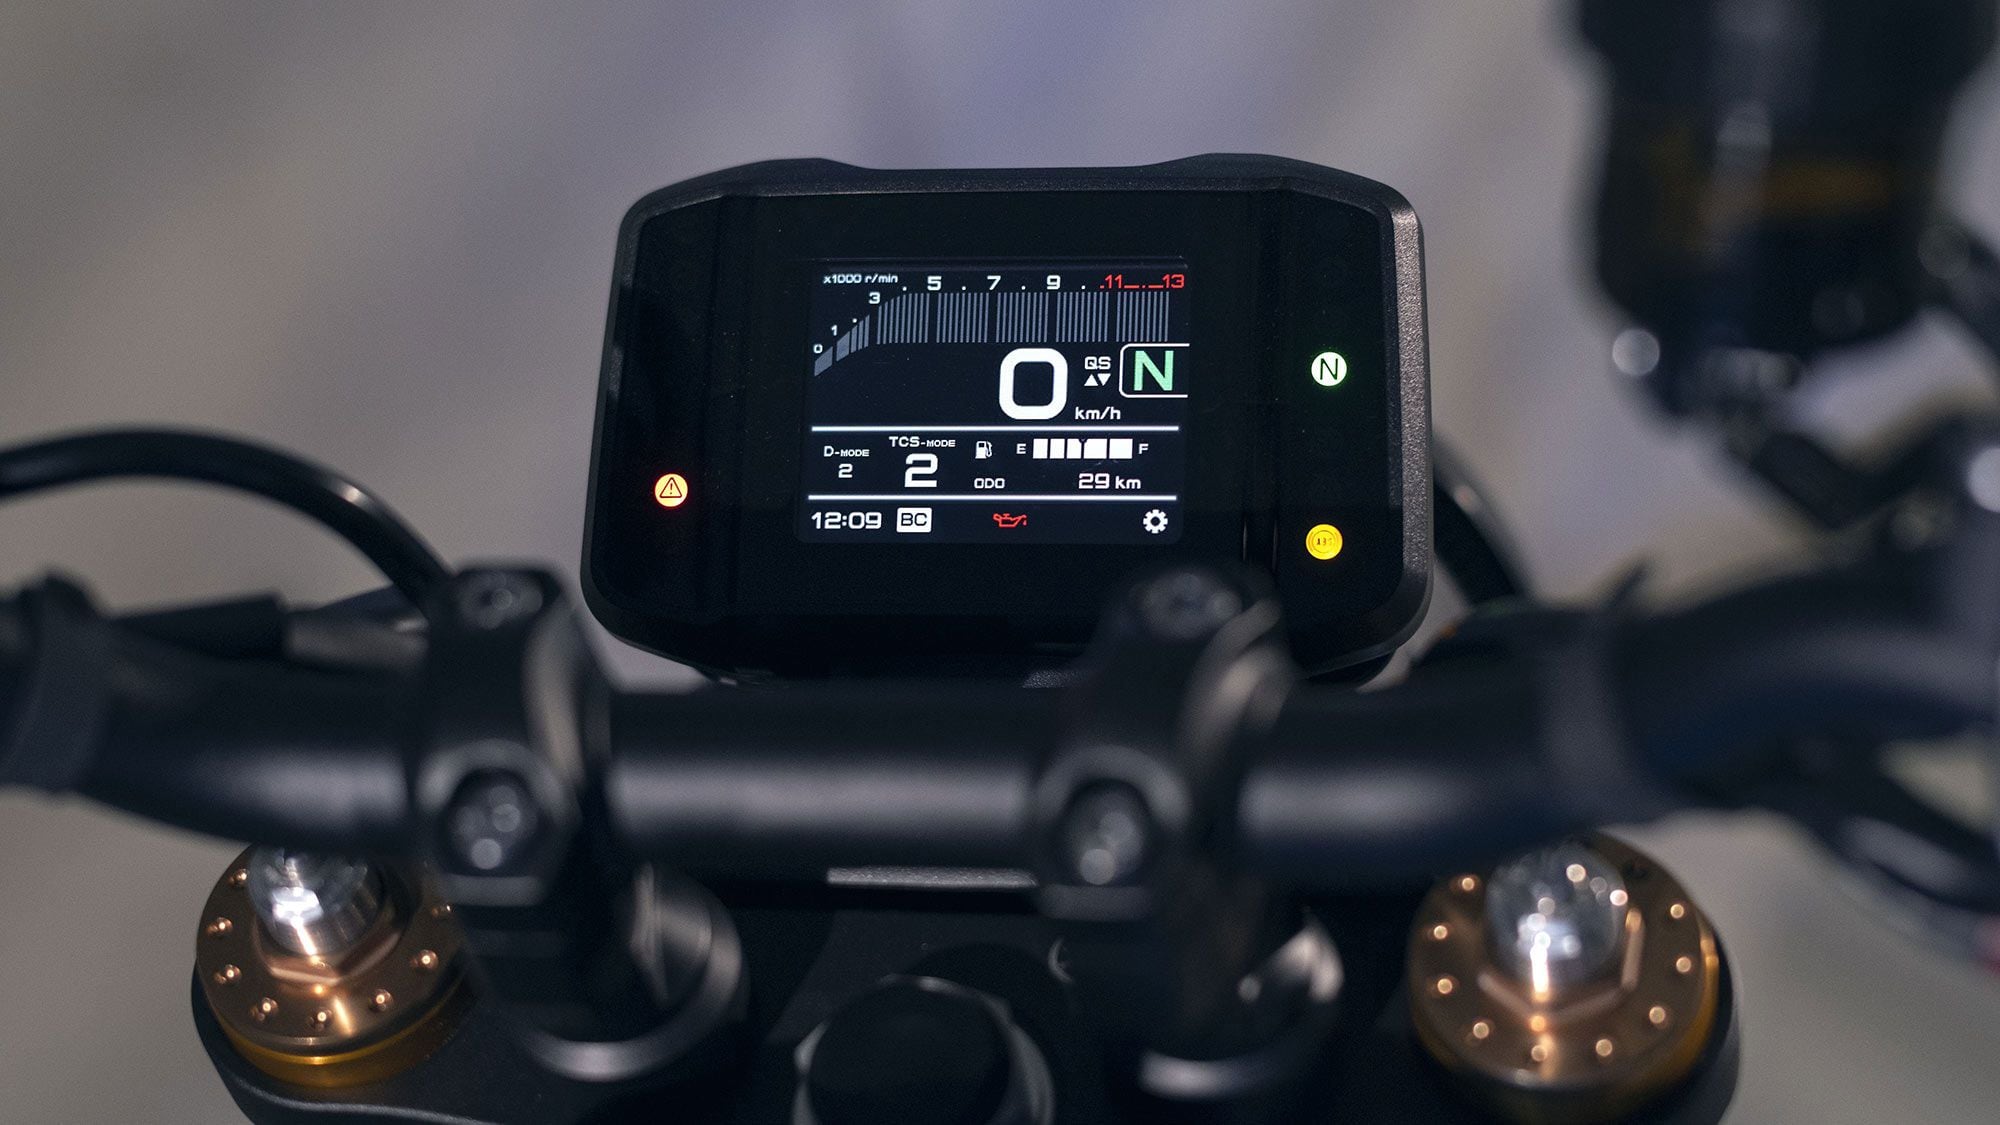 The 3.5-inch TFT color display provides info on chosen ride modes, traction control levels, and the usual basics.